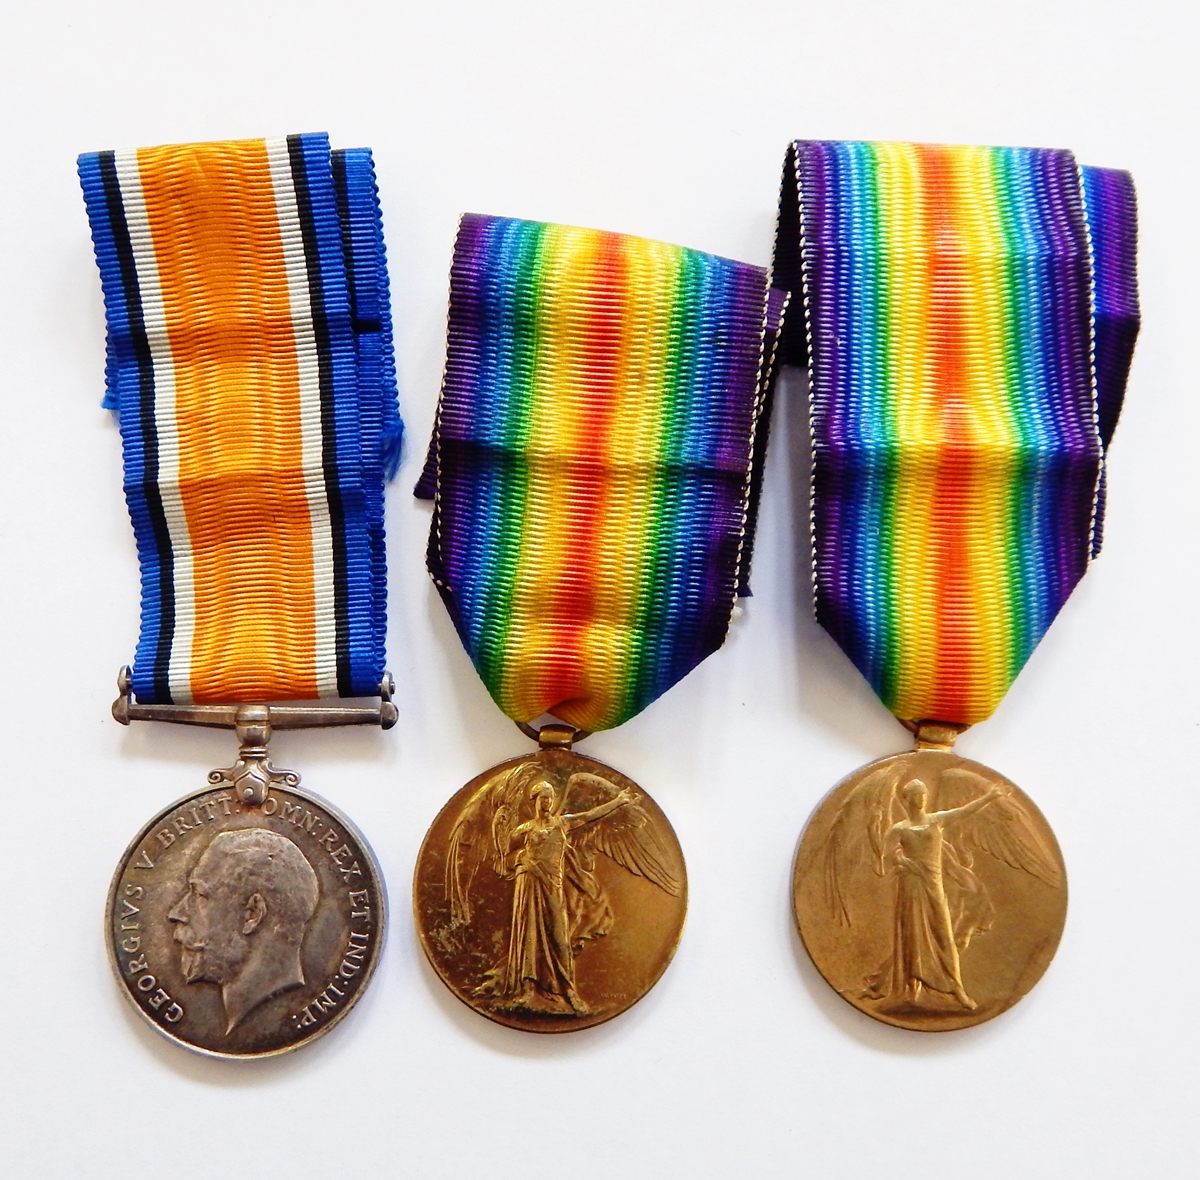 WWI War medal and Victory medal named to '4795 PTE F DALLIMORE Glouc R' and Victory medal named to